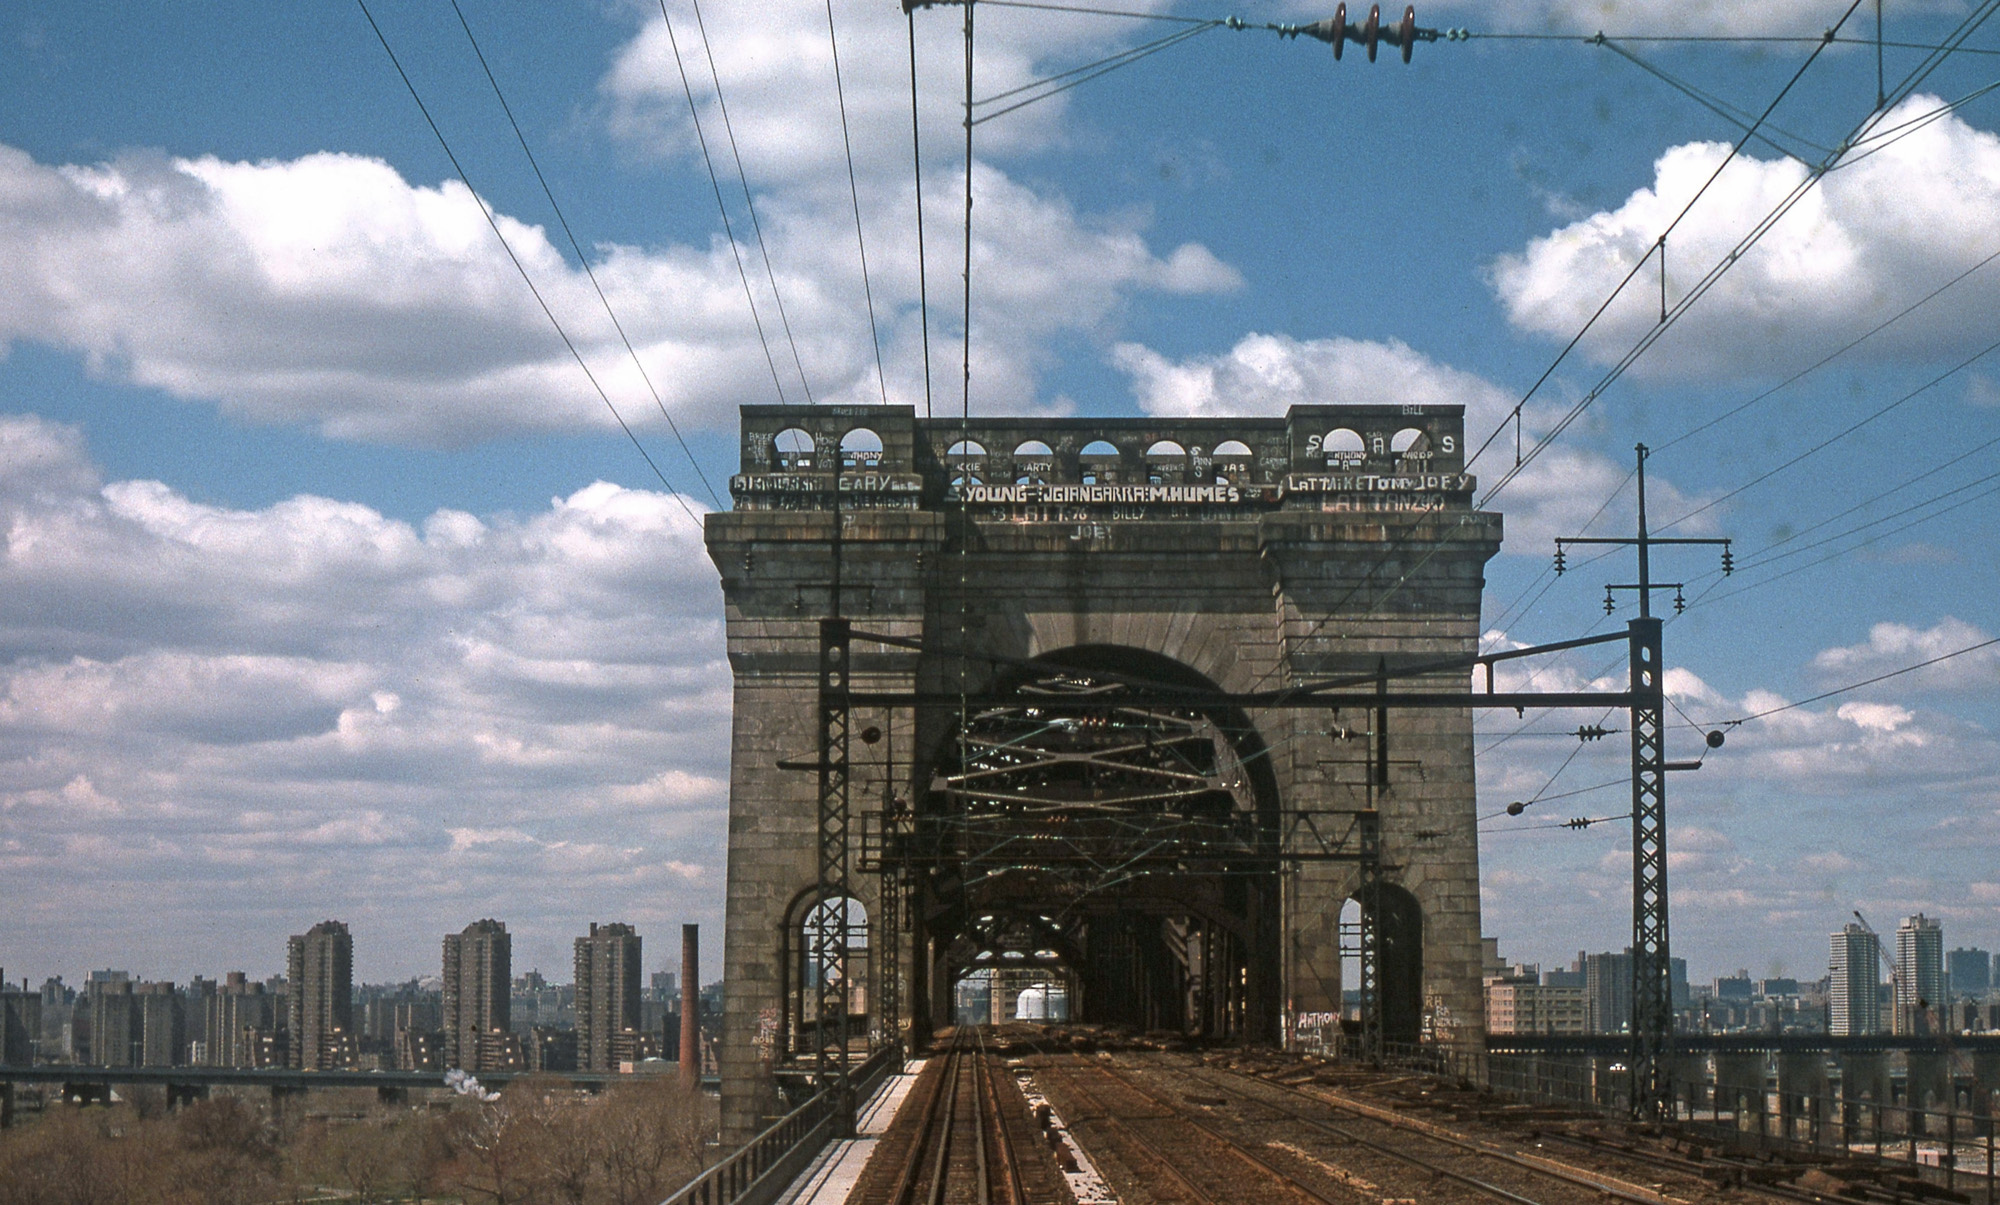 The Hell Gate bridge from the Amtrak train "Colonial." A real marvel, to me, even by today's standards. View full size.